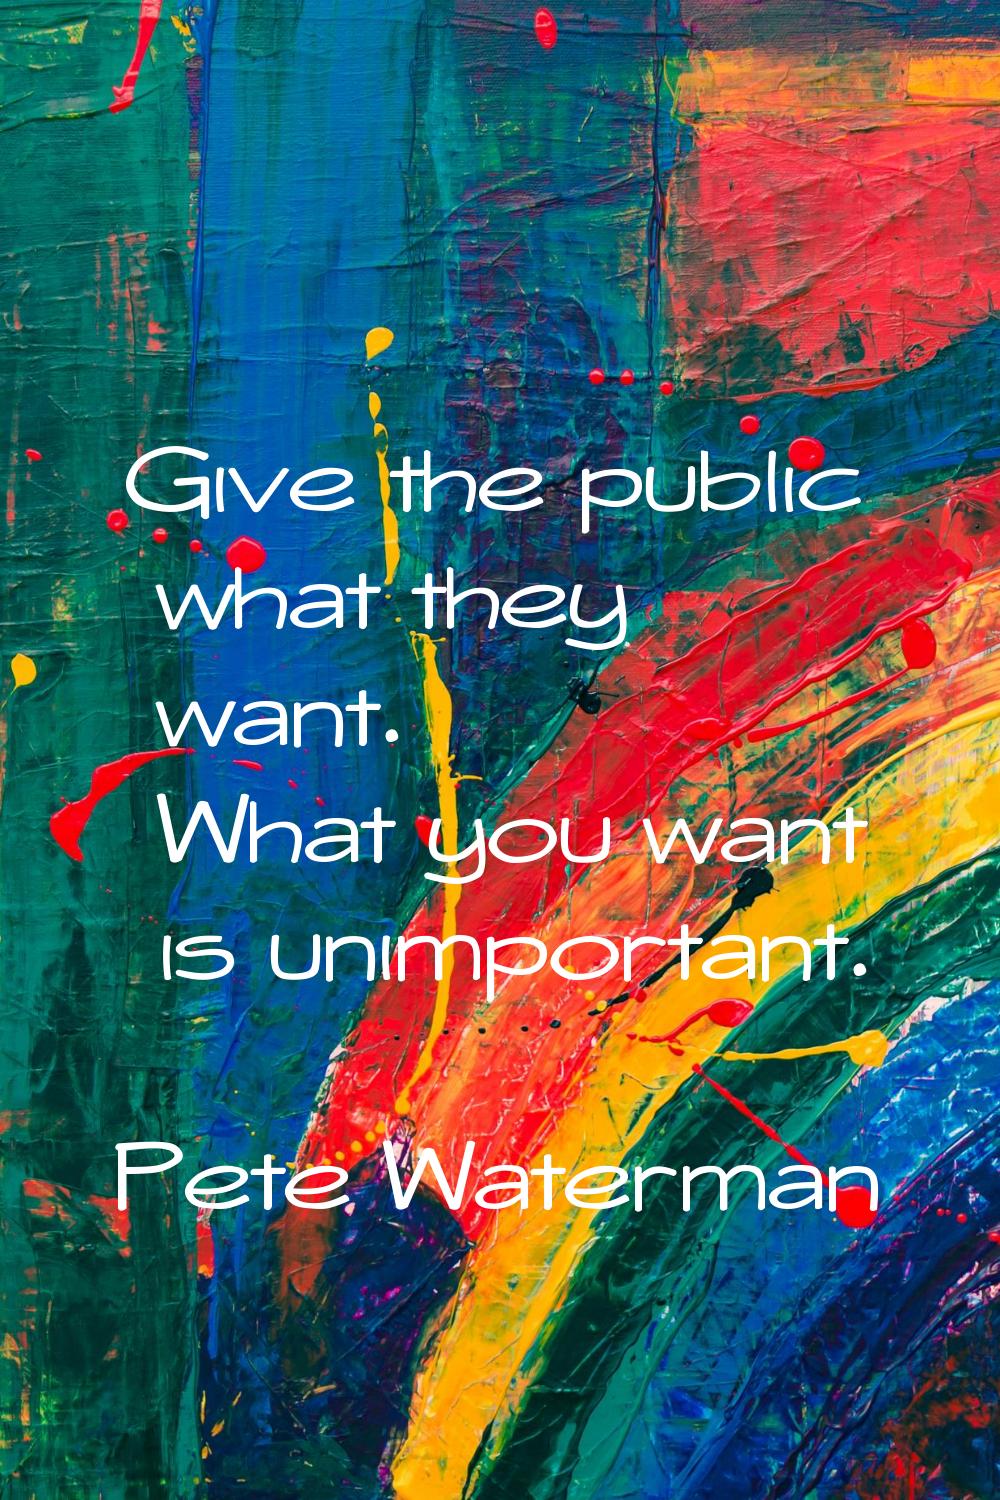 Give the public what they want. What you want is unimportant.